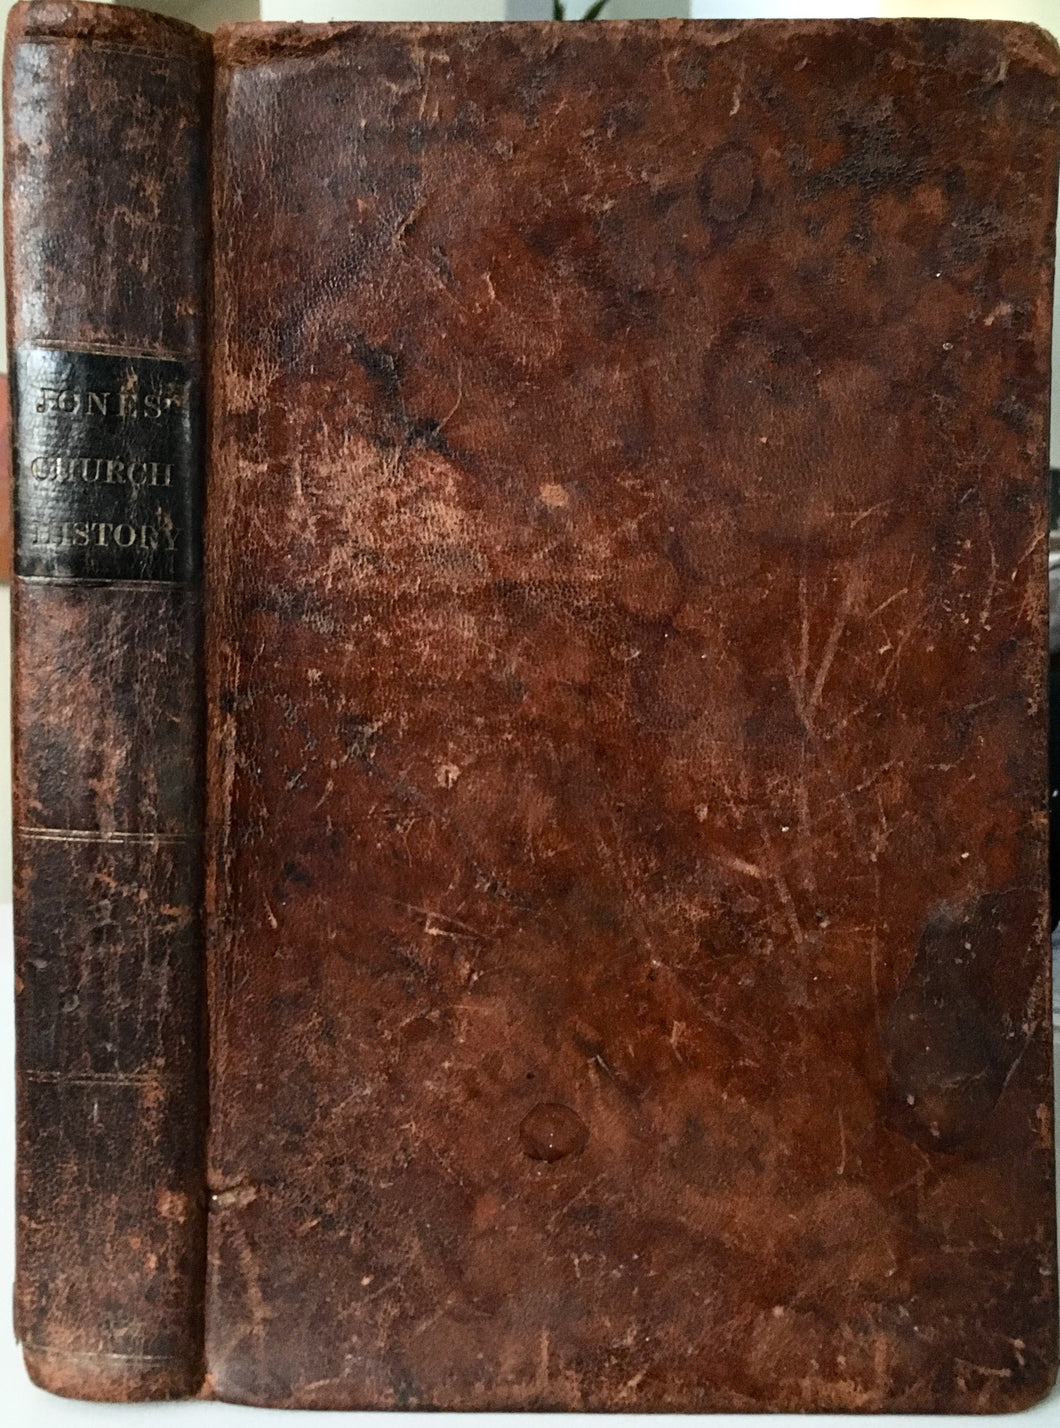 1837 WILLIAM JONES. History of the Waldensians and Albigenses - Published Freewill Baptists